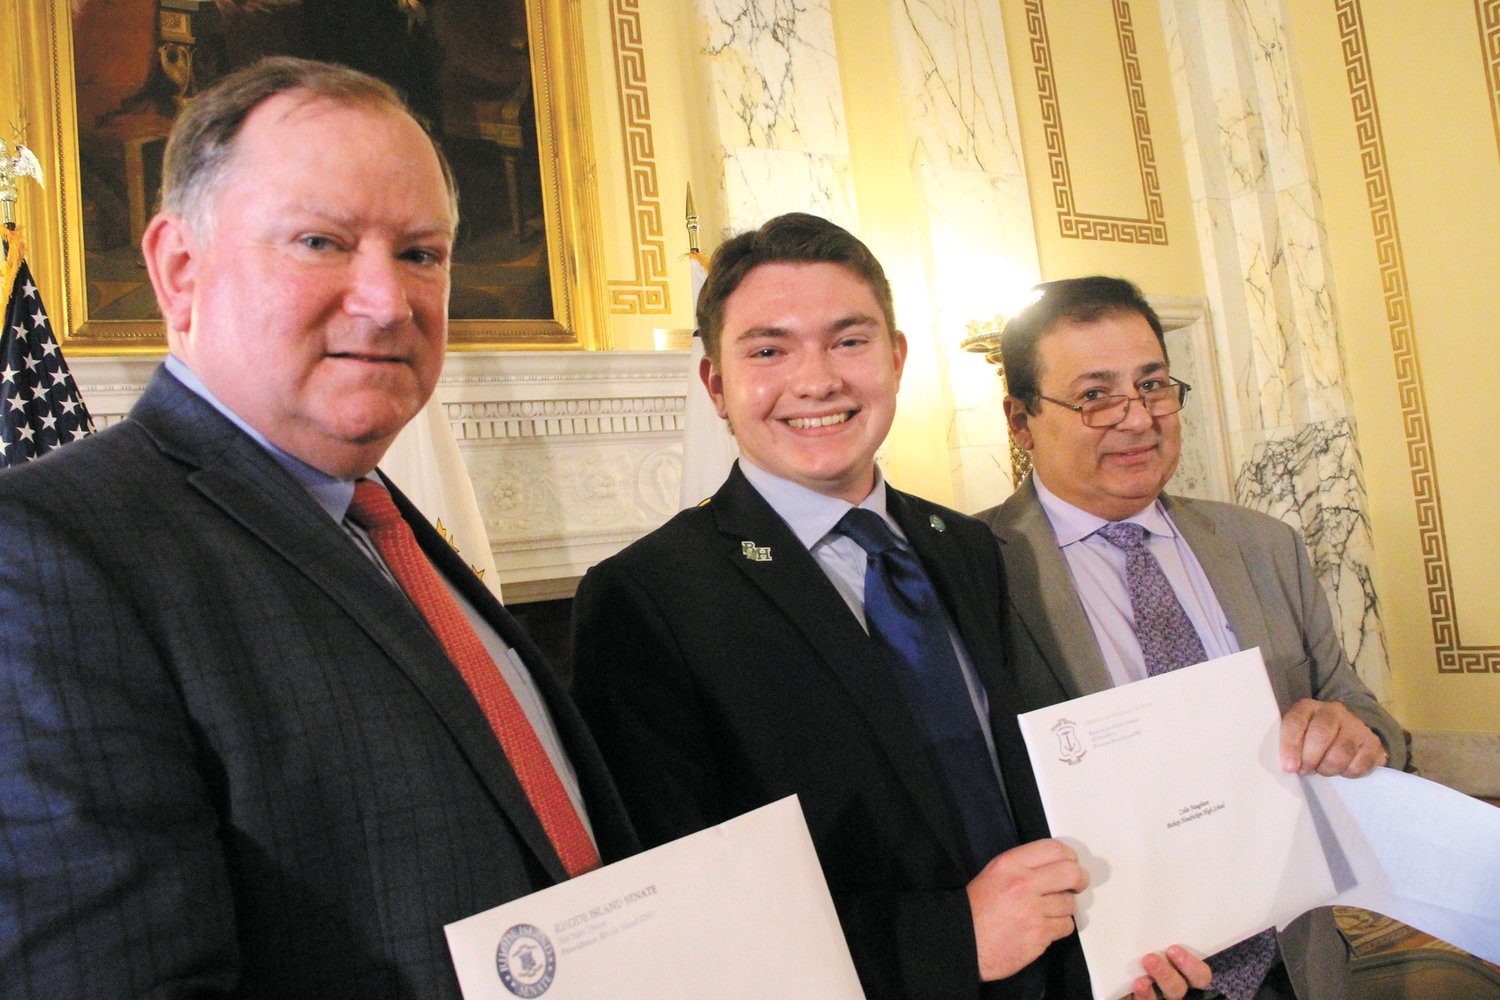 A BREAK FROM SCHOOL & SENIOR EXPERIENCE: Colin Naughton, who won a gold medal for his speech in the 2022 RI Academic Decathlon was one of nine senior recipients to receive a $500 scholarship from House Speaker K. Joseph Shekarci in ceremonies May 17 at the State House. Senate Majority Leader Michael McCaffrey, left, also presented Naughton with a citation. (Warwick Beacon photo)